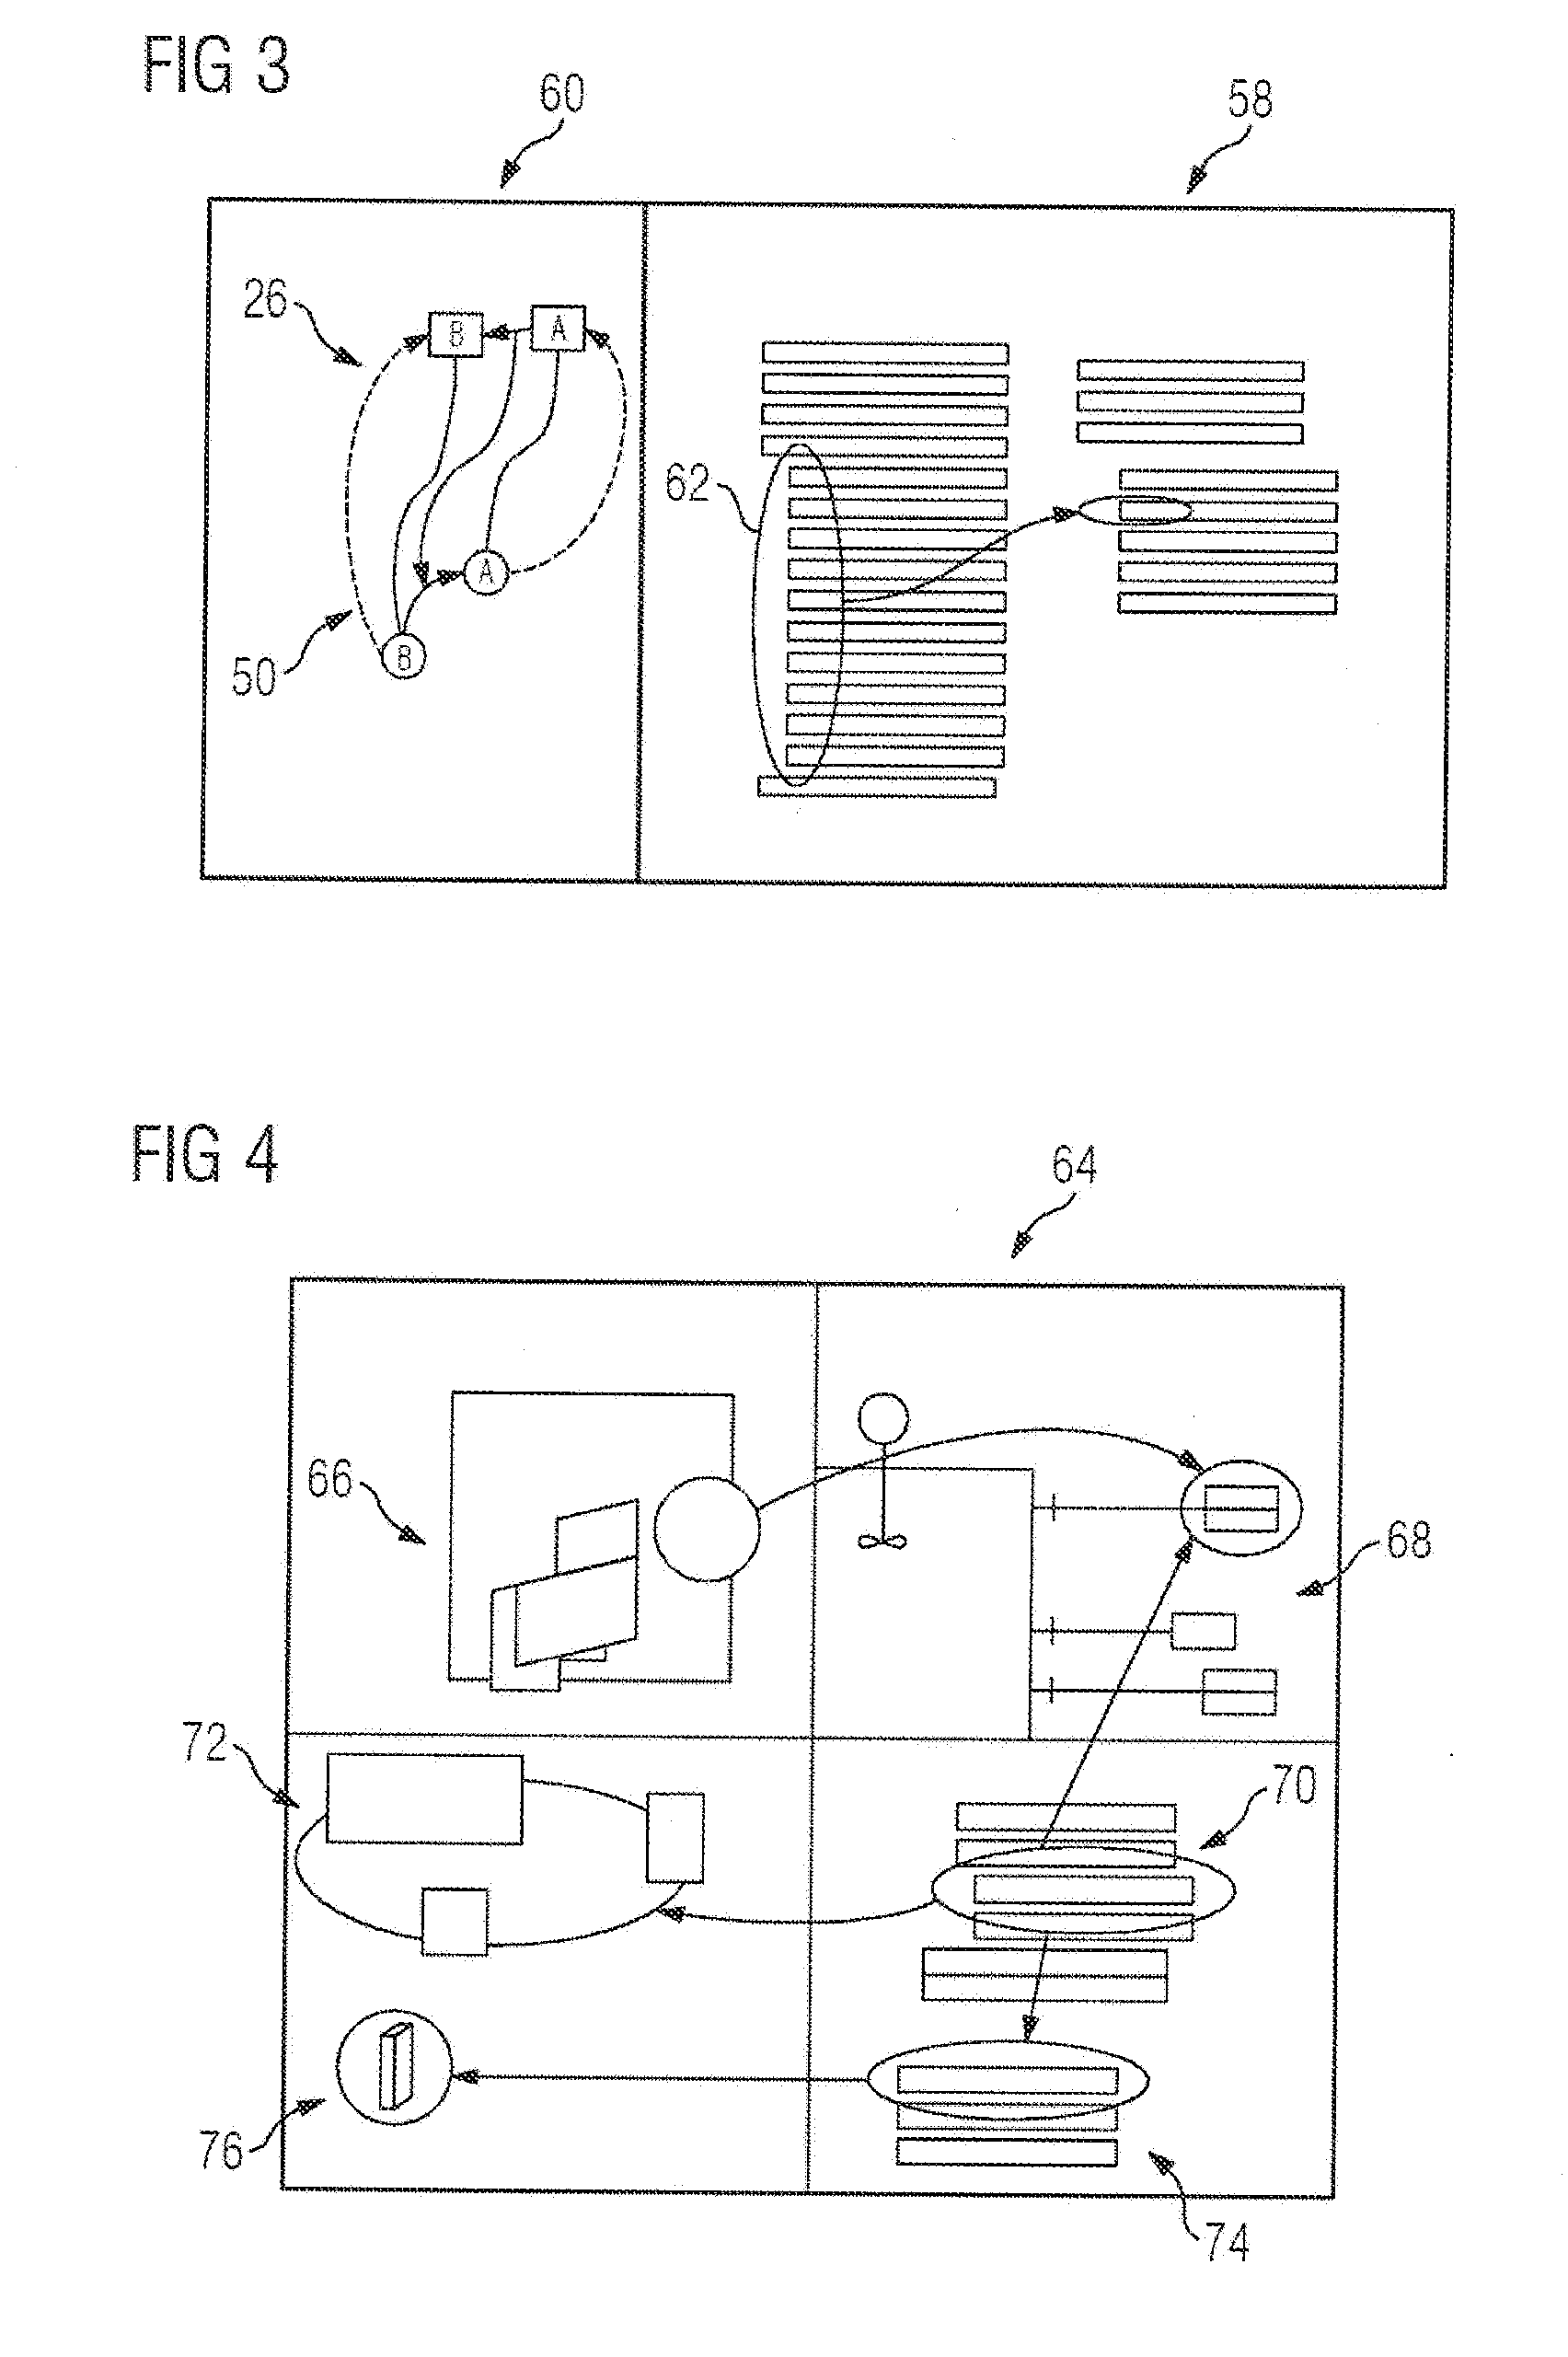 Method for Monitoring a Process and/or Production Plant